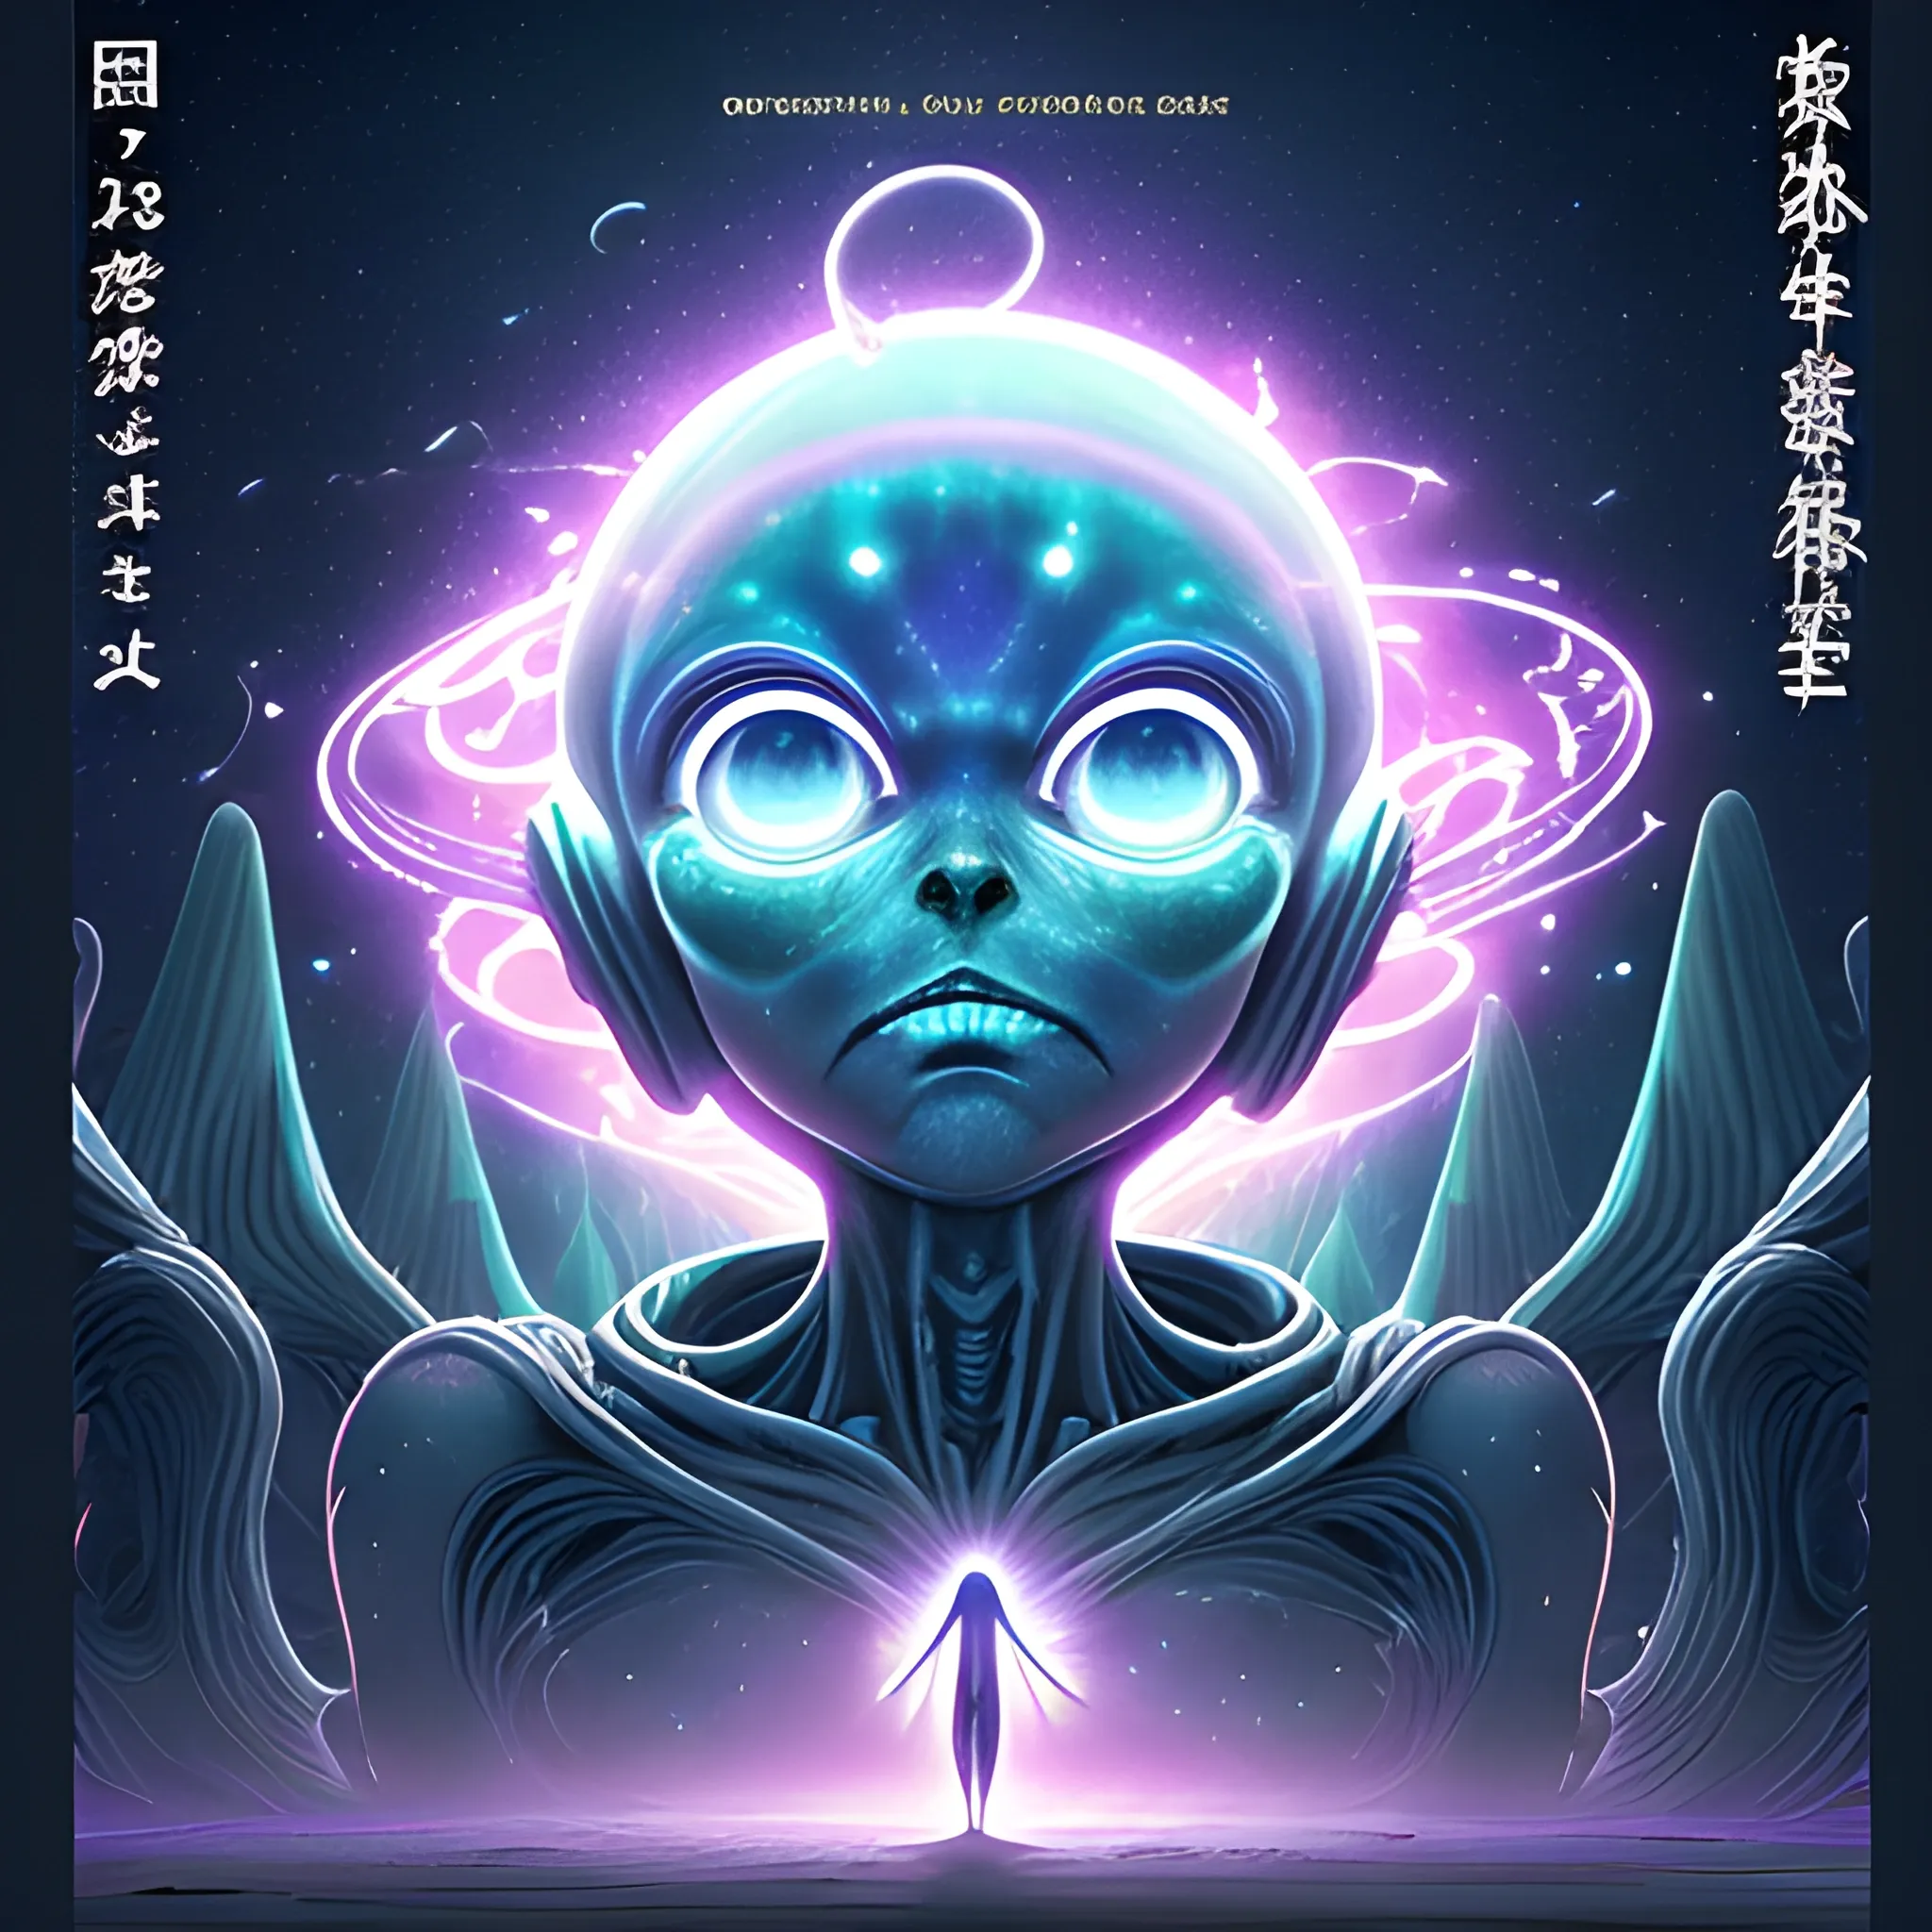 Otherworldly Greeting, Unearthly Presence, Cosmic Connection, Cinematic Encounter, Radiant Emanation, 3D Style, Alien Anime, width 960, height 540, seed: 566136464, steps: 60, version: SH_Deliberate